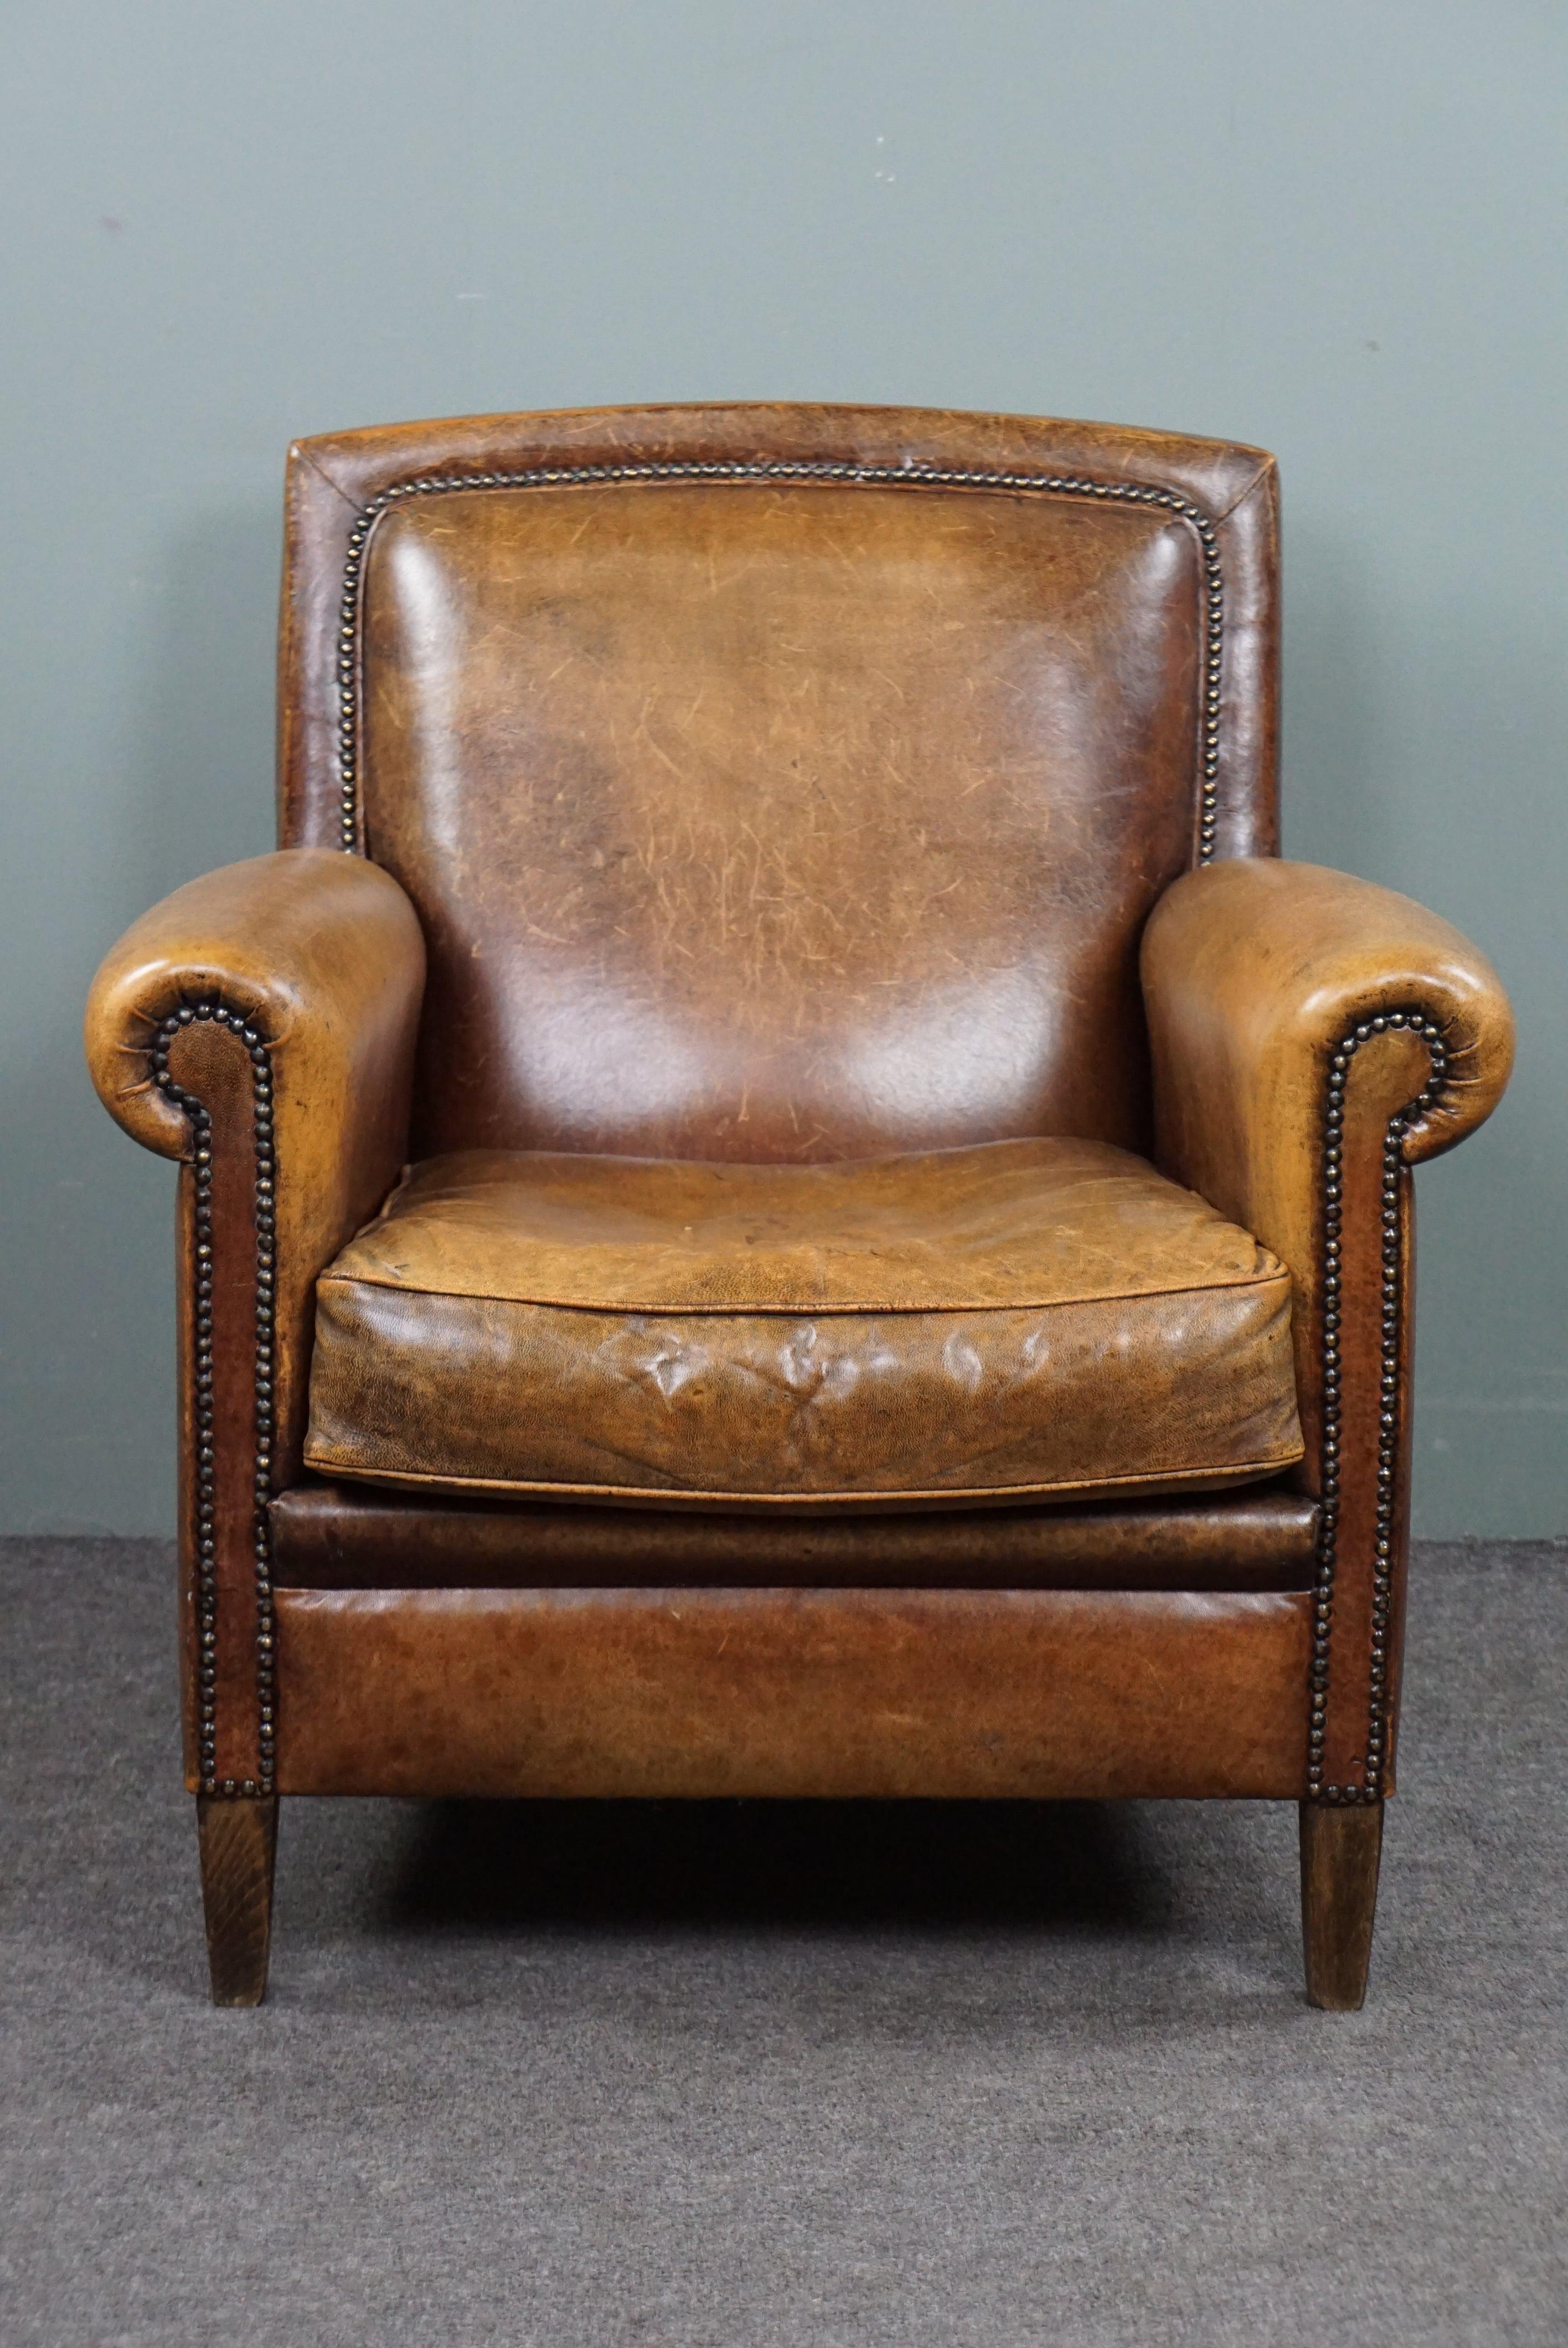 Offered is this well-fitting sheepskin leather fauteuil. This beautiful sheepskin leather armchair/fauteuil is exquisite in color, form, and size, providing excellent comfort and a premium look and feel. With its rich and vibrant colors, lovely